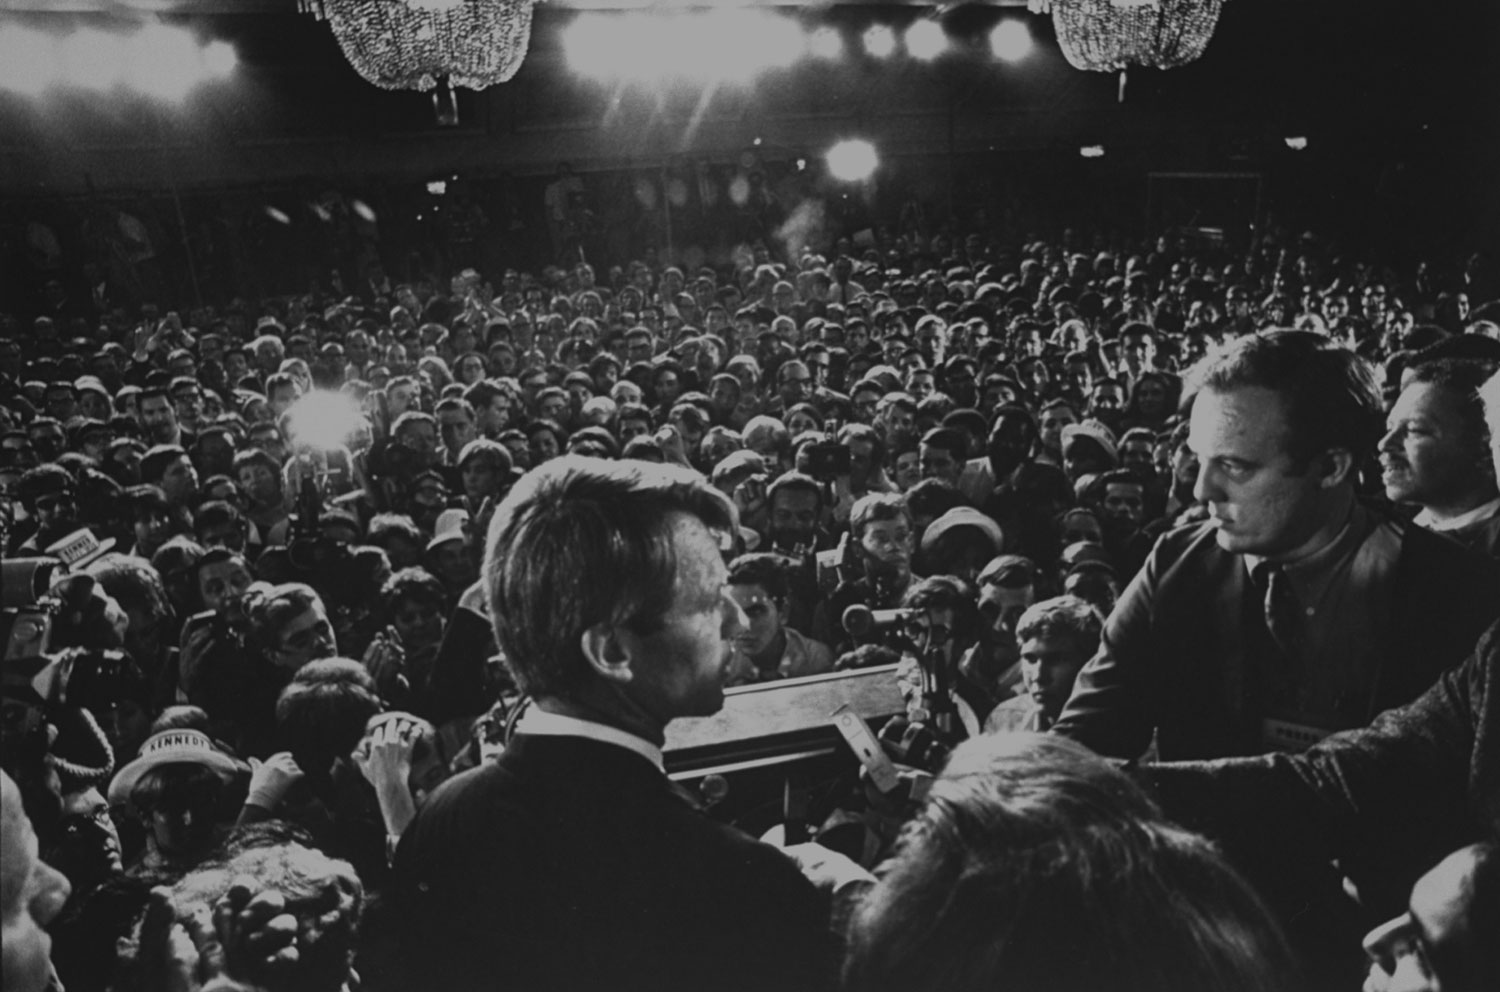 Sen. Robert Kennedy gives a speech at the Ambassador Hotel in Los Angeles before his assassination, June 1968.